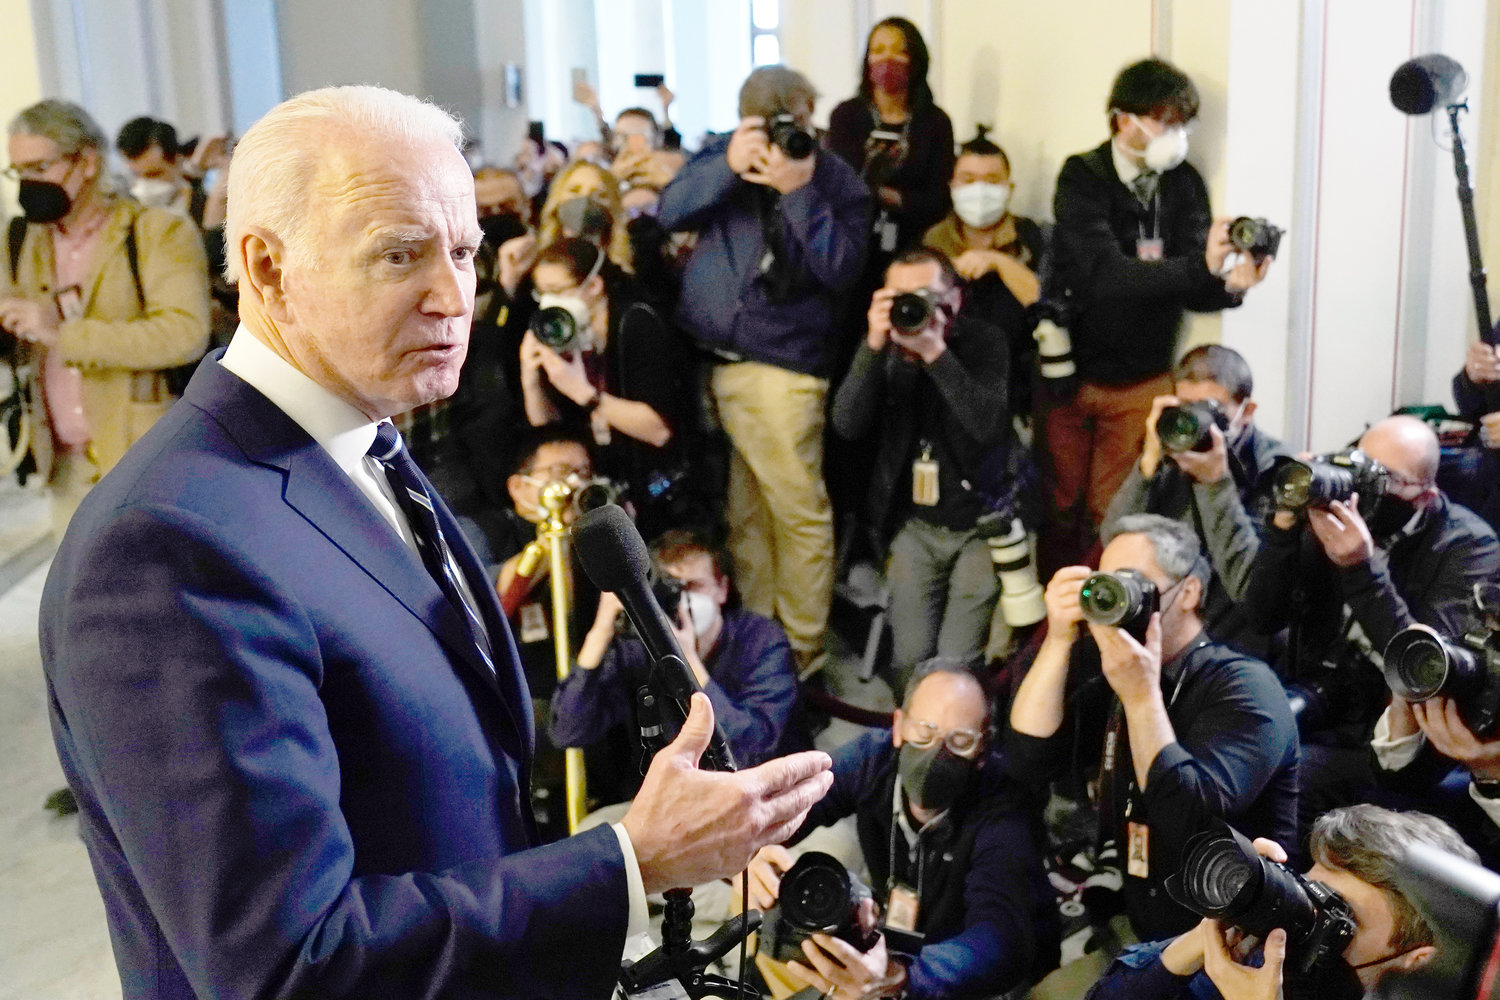 CAPITOL LUNCHEON — President Joe Biden speaks to the media after meeting privately with Senate Democrats Thursday on Capitol Hill in Washington. Major topics were upcoming voting rights legislation.